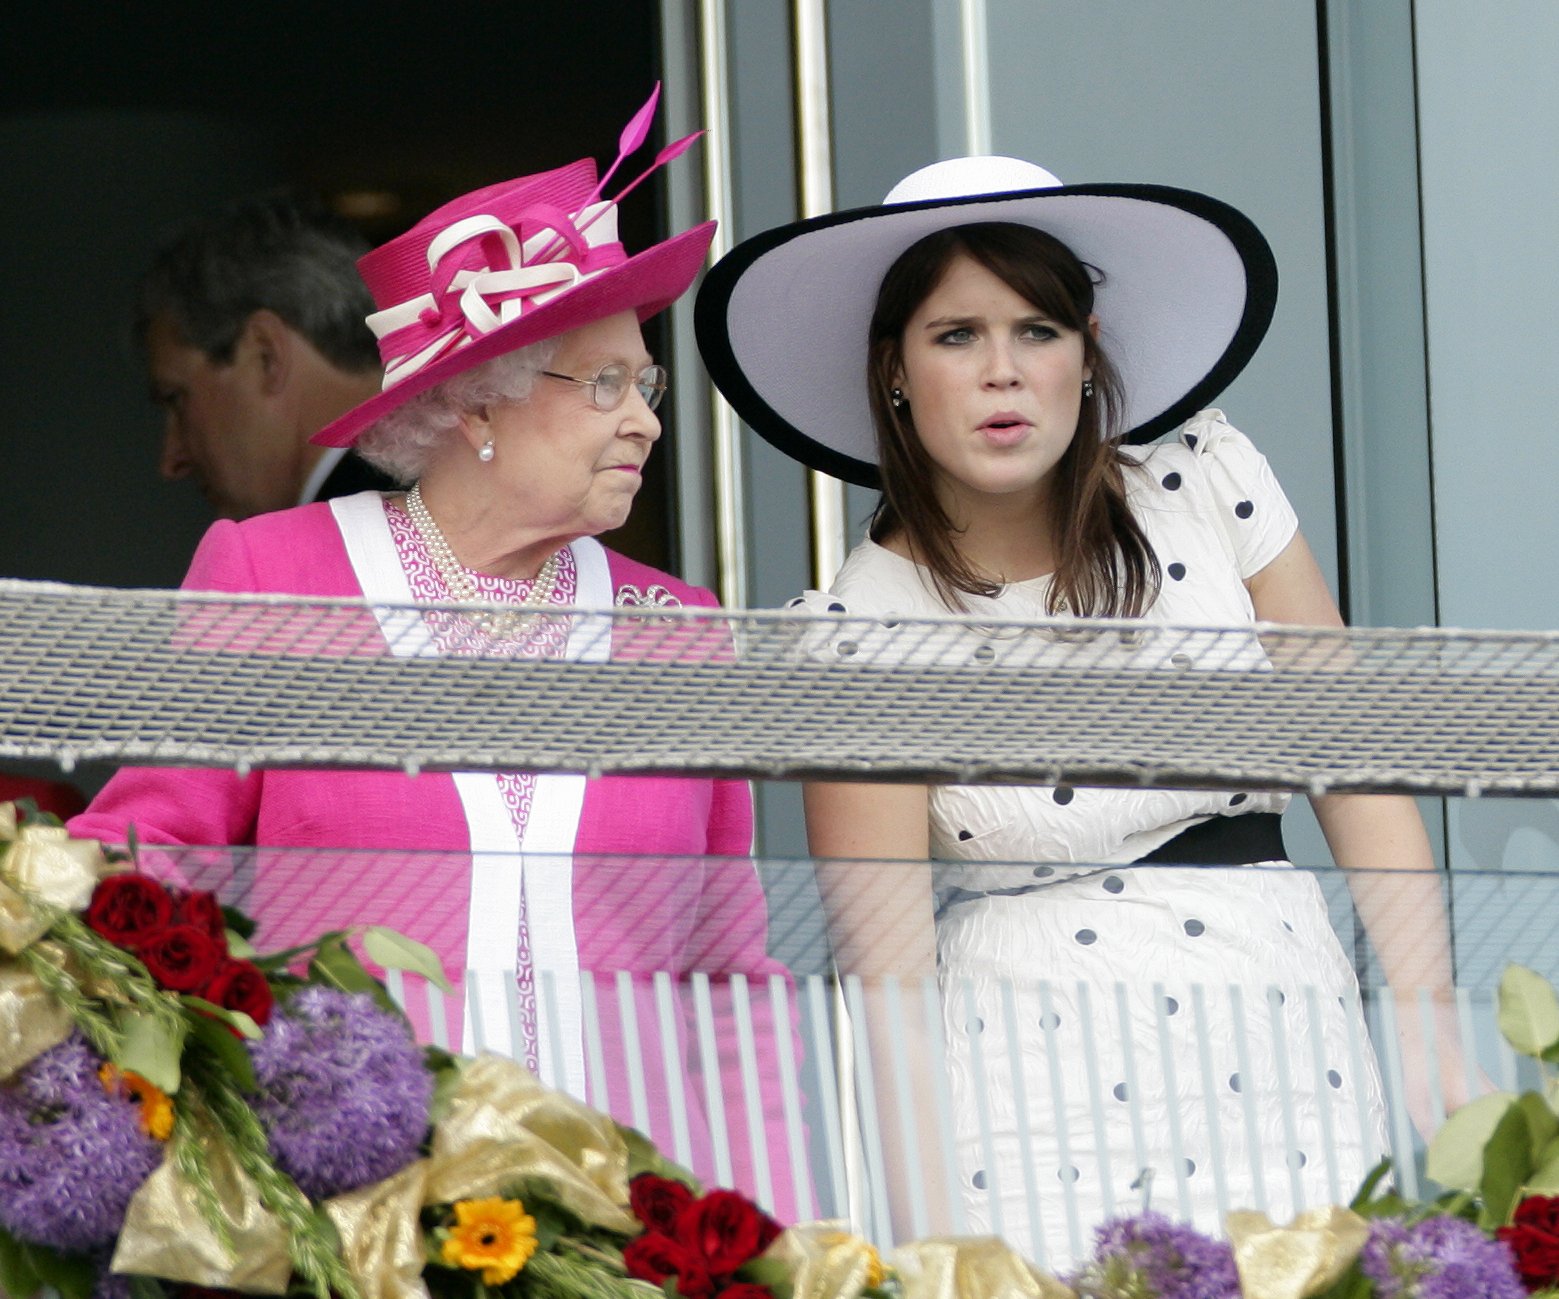 Queen Elizabeth II and Princess Eugenie on the balcony of the Royal Box at the Investec Derby Festival on June 4, 2011, in Epsom, England. | Source: Indigo/Getty Images